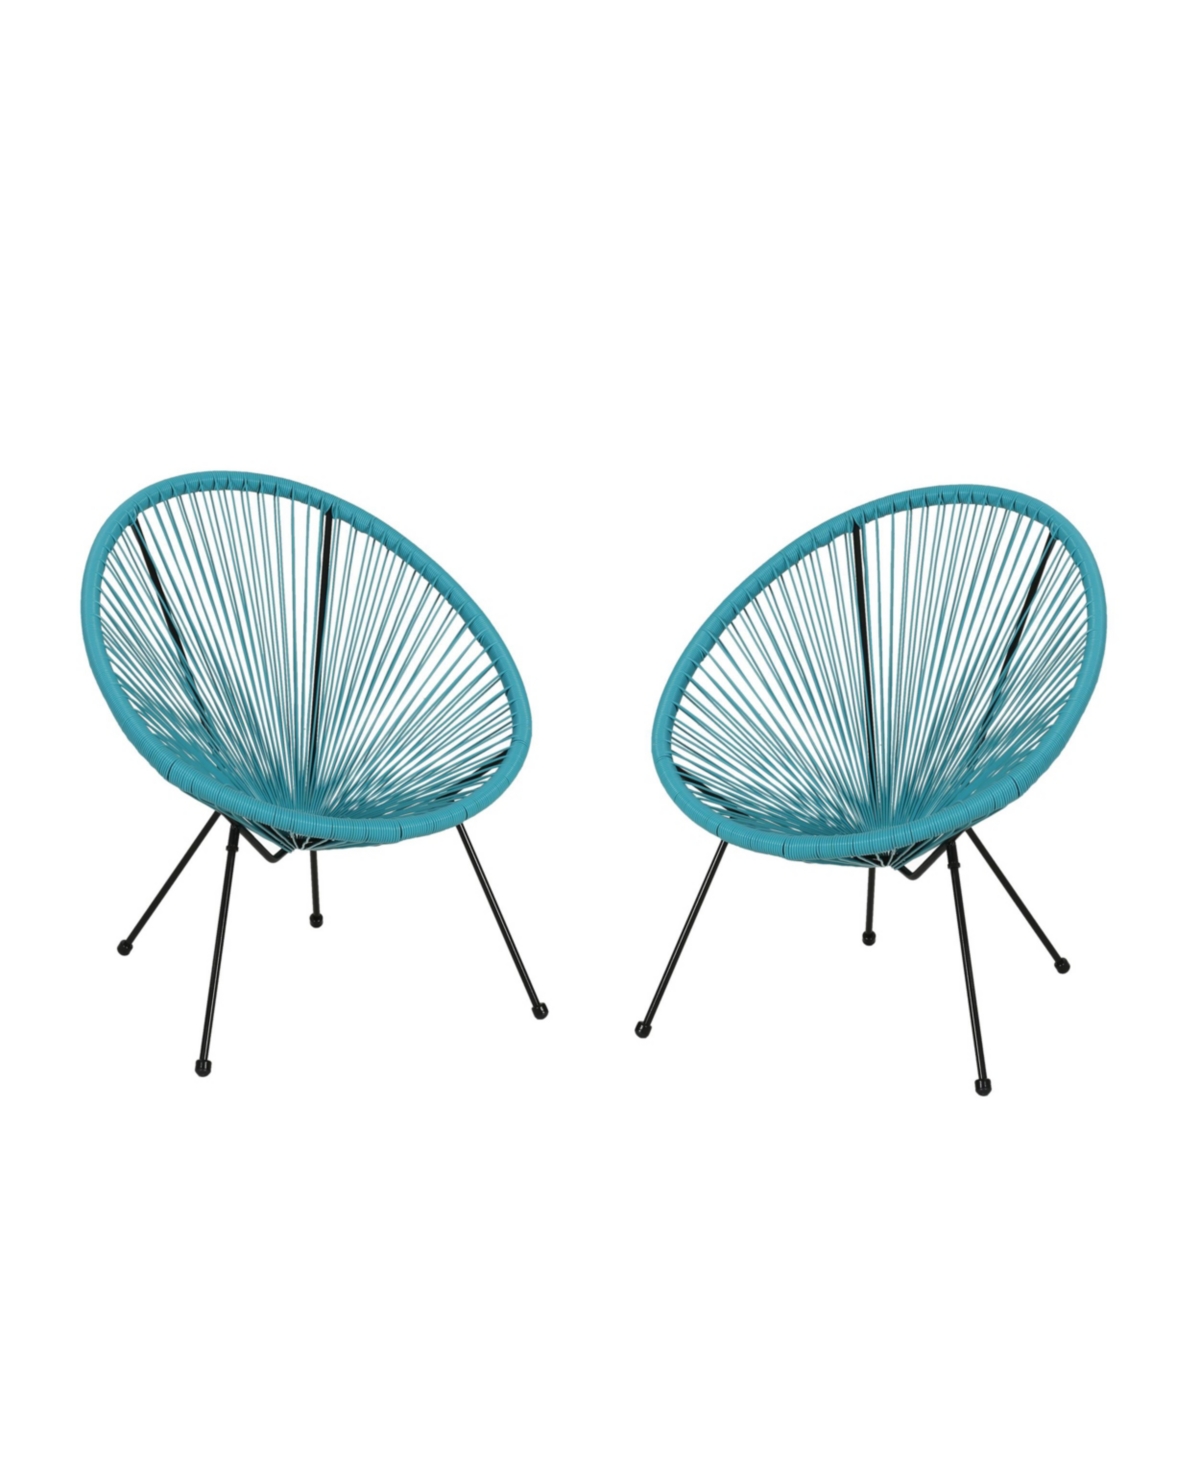 Noble House Anson Outdoor Hammock Weave Chair Set, 2 Piece In Teal